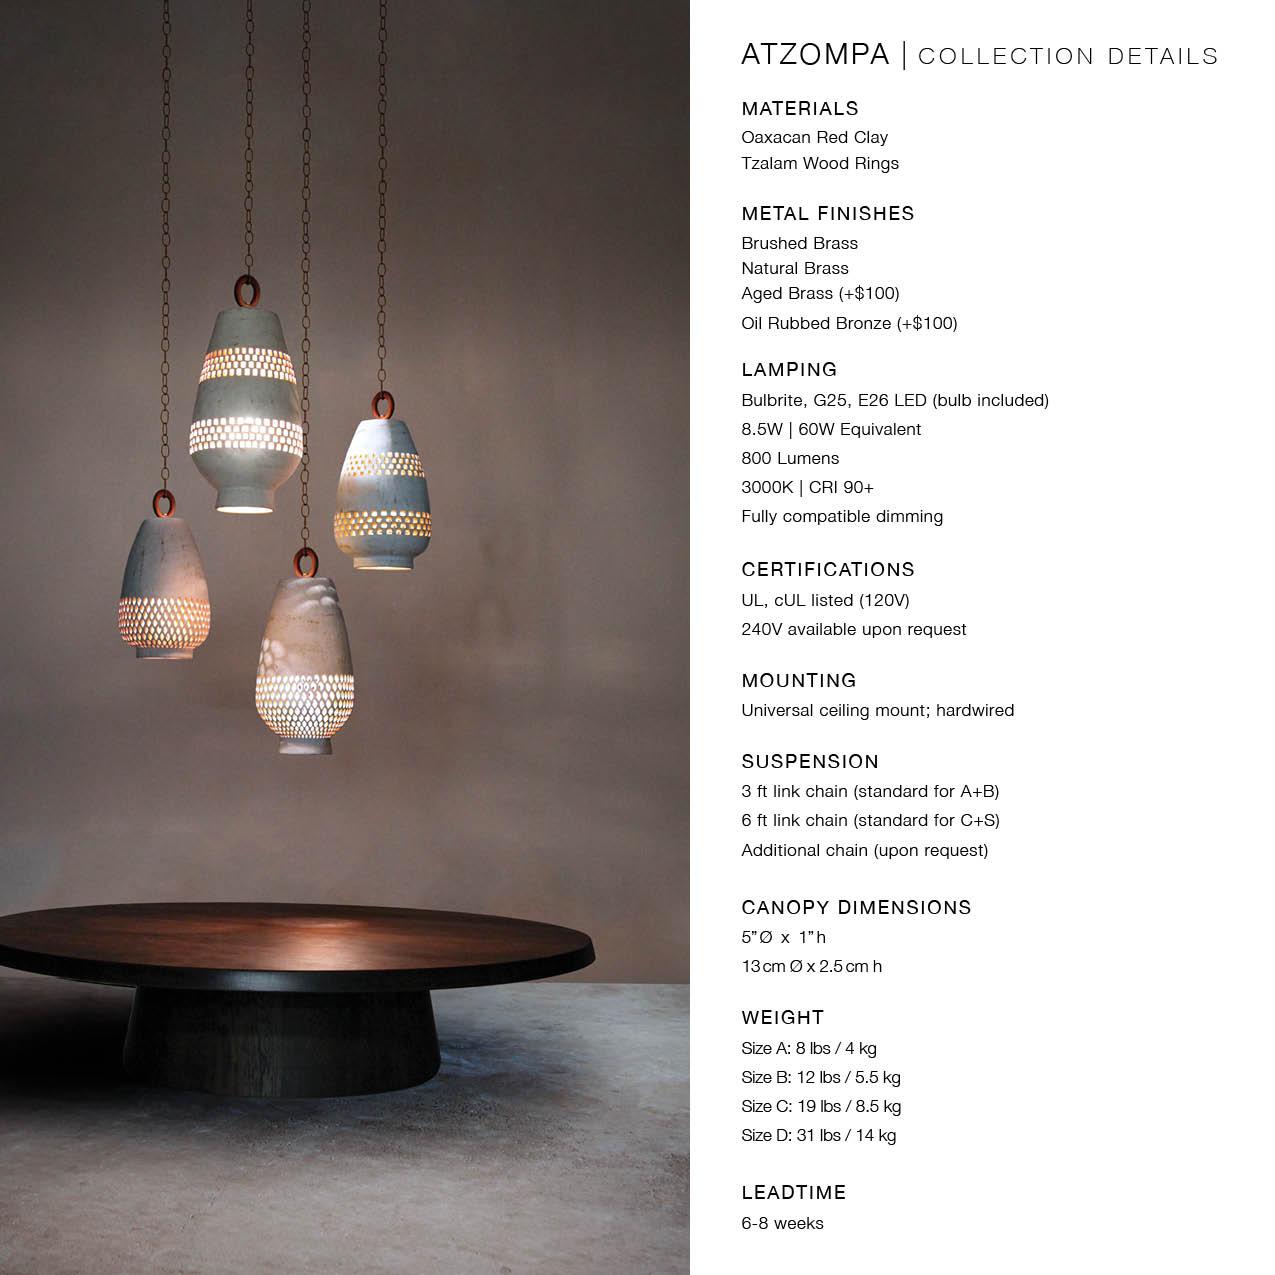 Small White Ceramic Pendant Light, Aged Brass, Ajedrez Atzompa Collection In New Condition For Sale In New York, NY